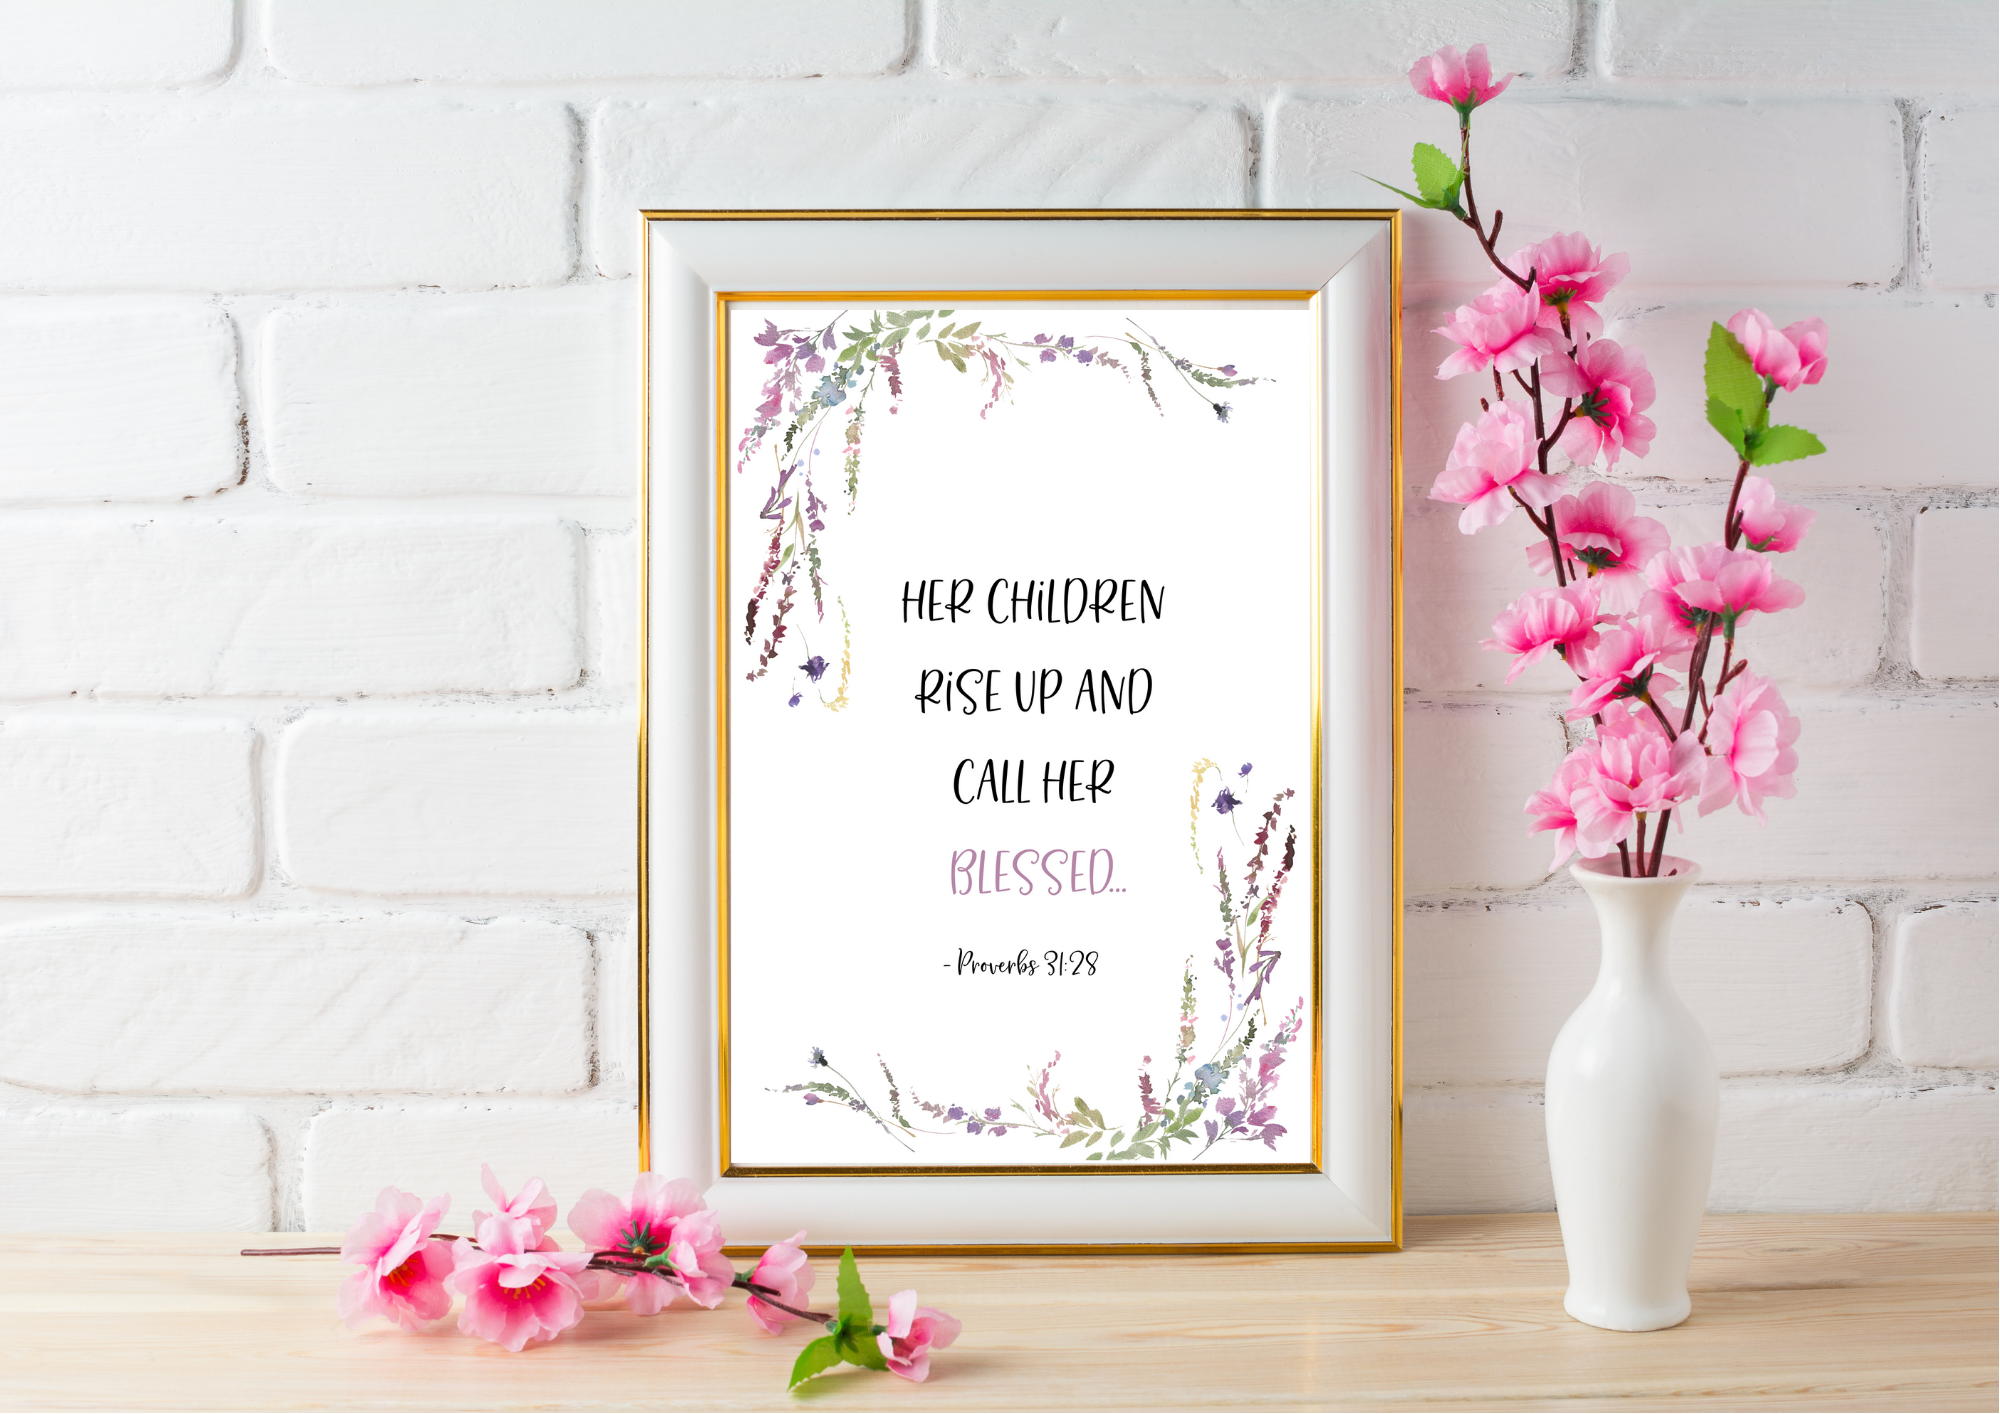 Her Children Call Her Blessed - Proverbs 31:28 | Decor Print - Auxano Life